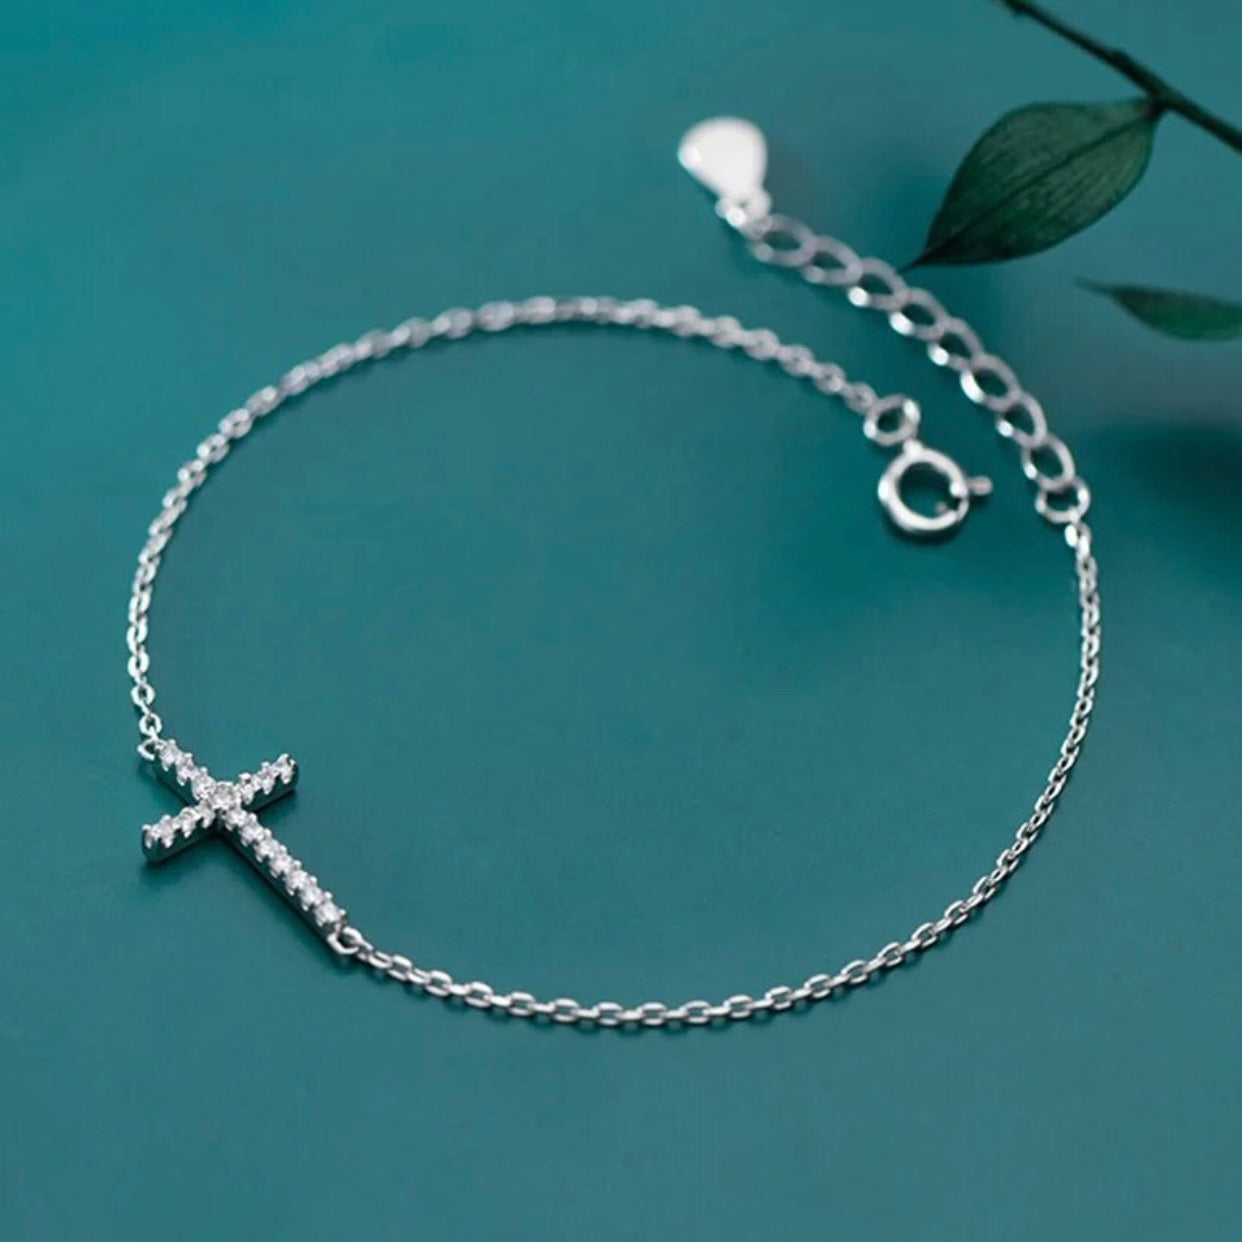 ANNA CROSS WITH CUBIC ZIRCONIA LINK CHAIN BRACELET